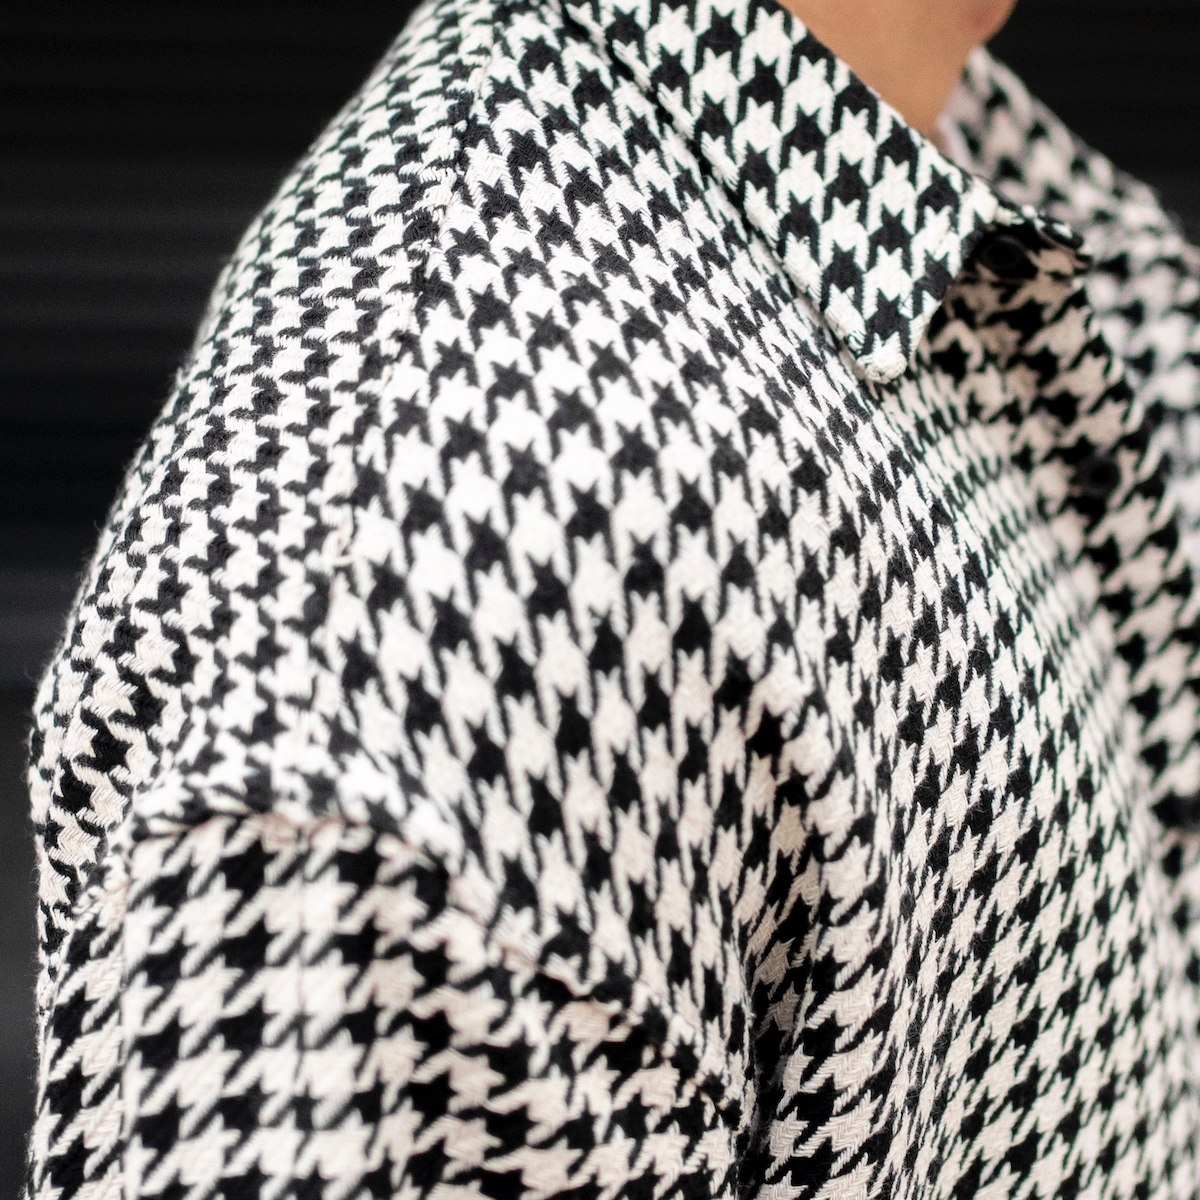 Men's Plaid Patterned Houndstooth Oversize Shirt In Black & White - 3